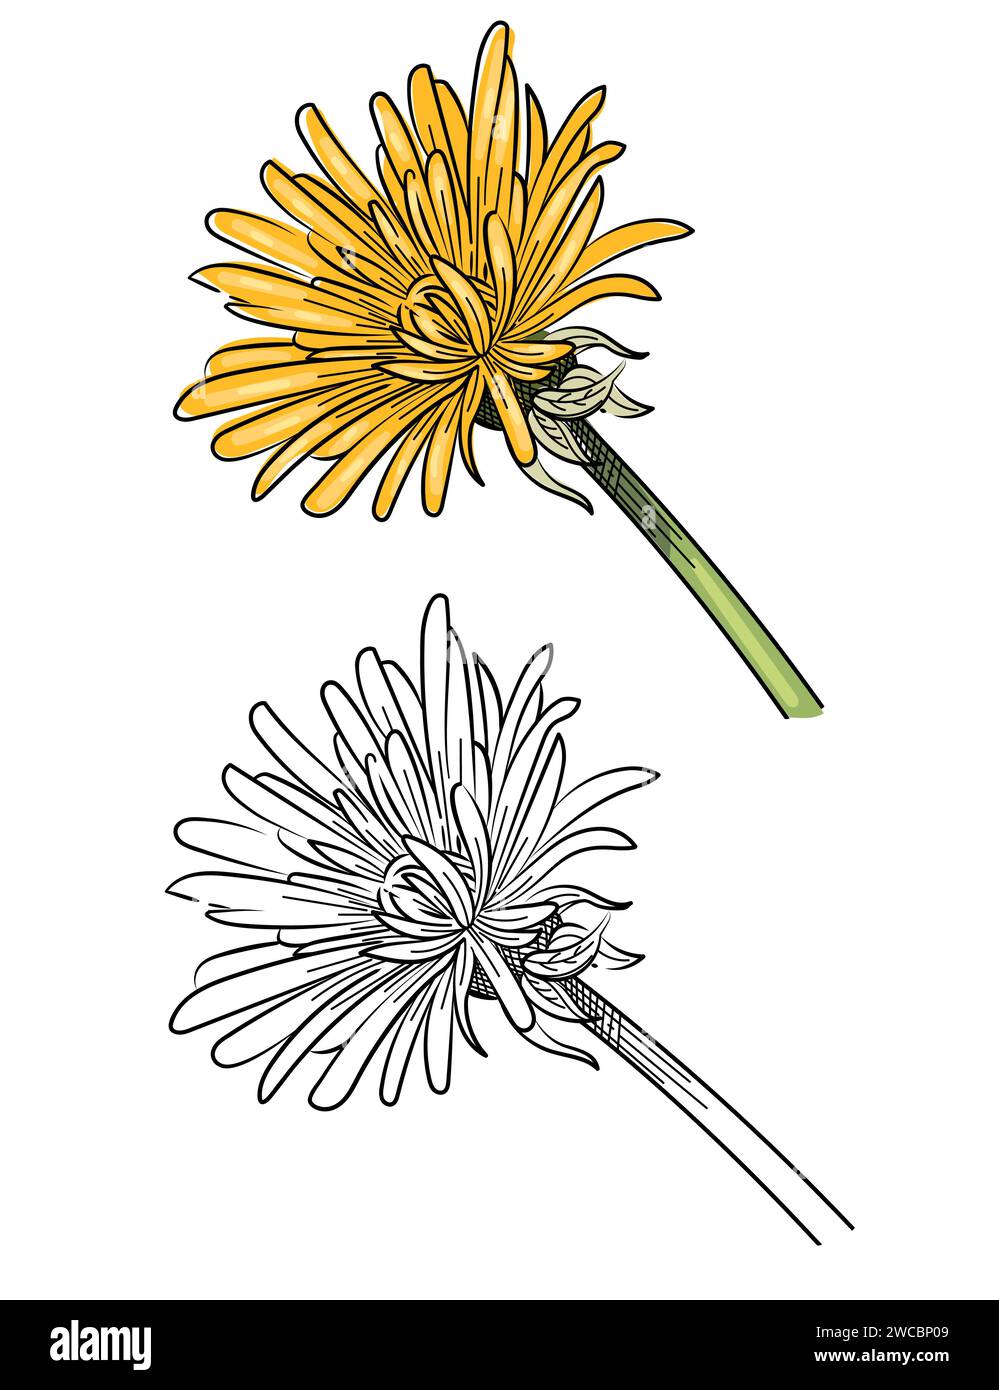 Dandelion flower head hand drawn colorful sketch for drawing book vector illustration isolated on white background Stock Vector